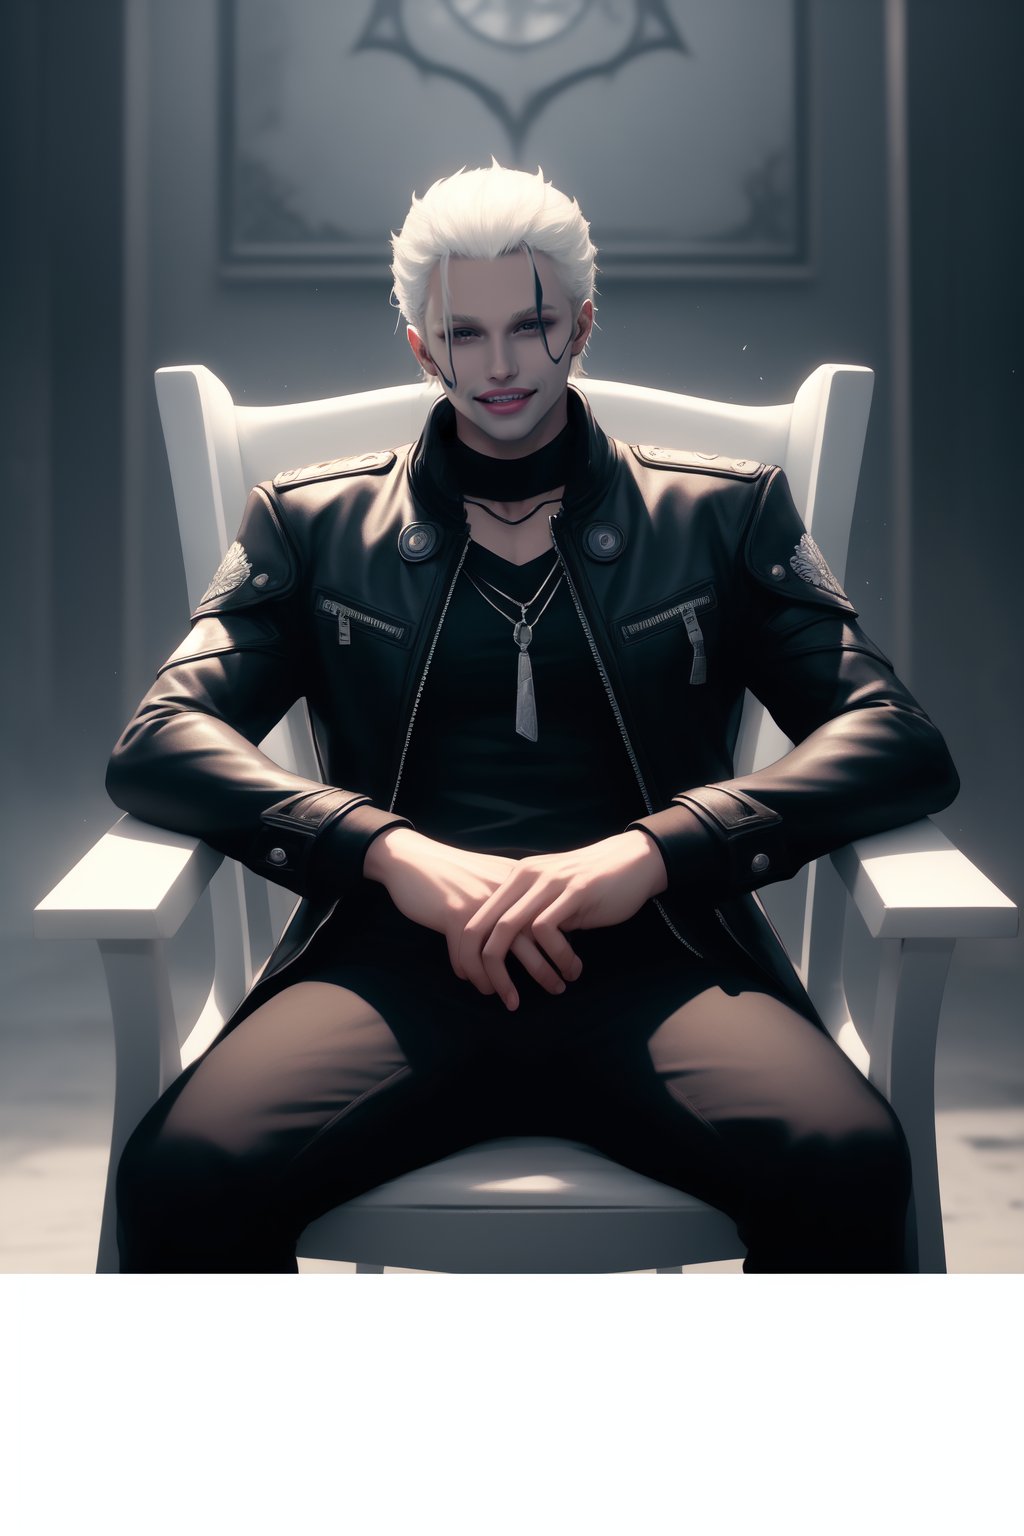 vergil from devil may cry 5, intimidating, looking at viewer, expression of rage, highly detailed, holding a white chair